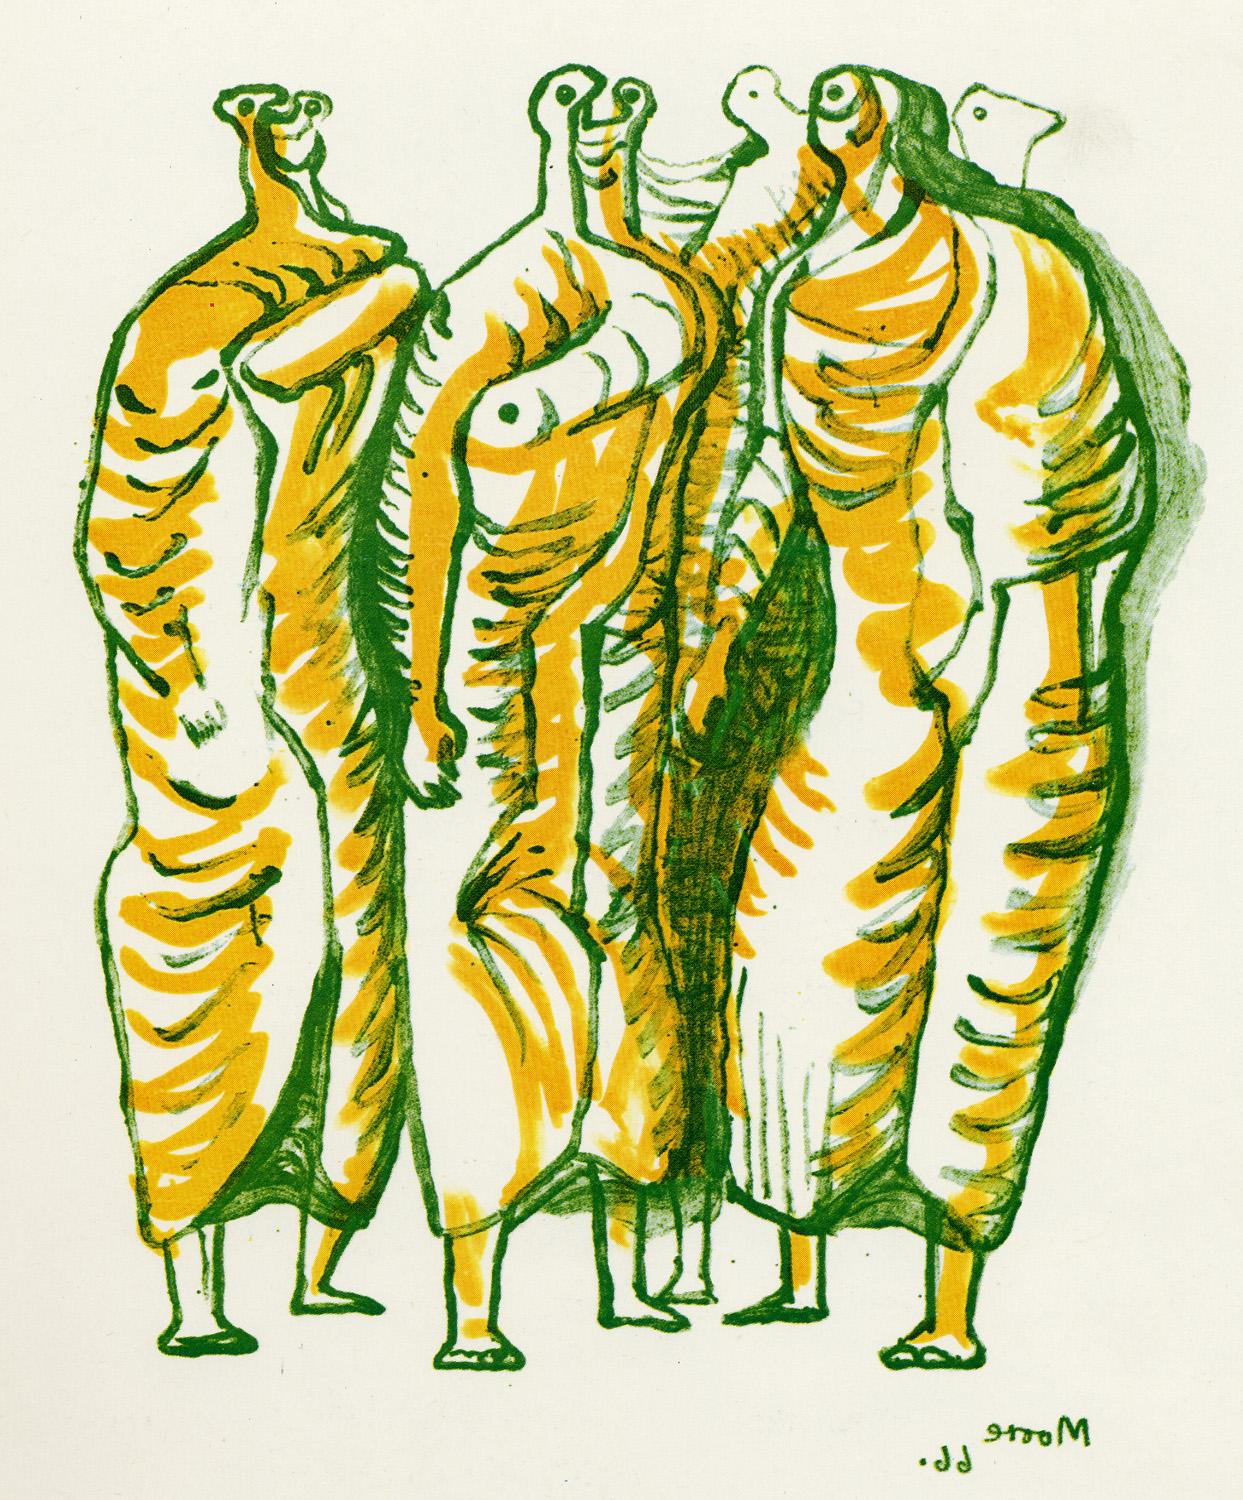 Standing Figures - 20th Century, Print by Henry Moore